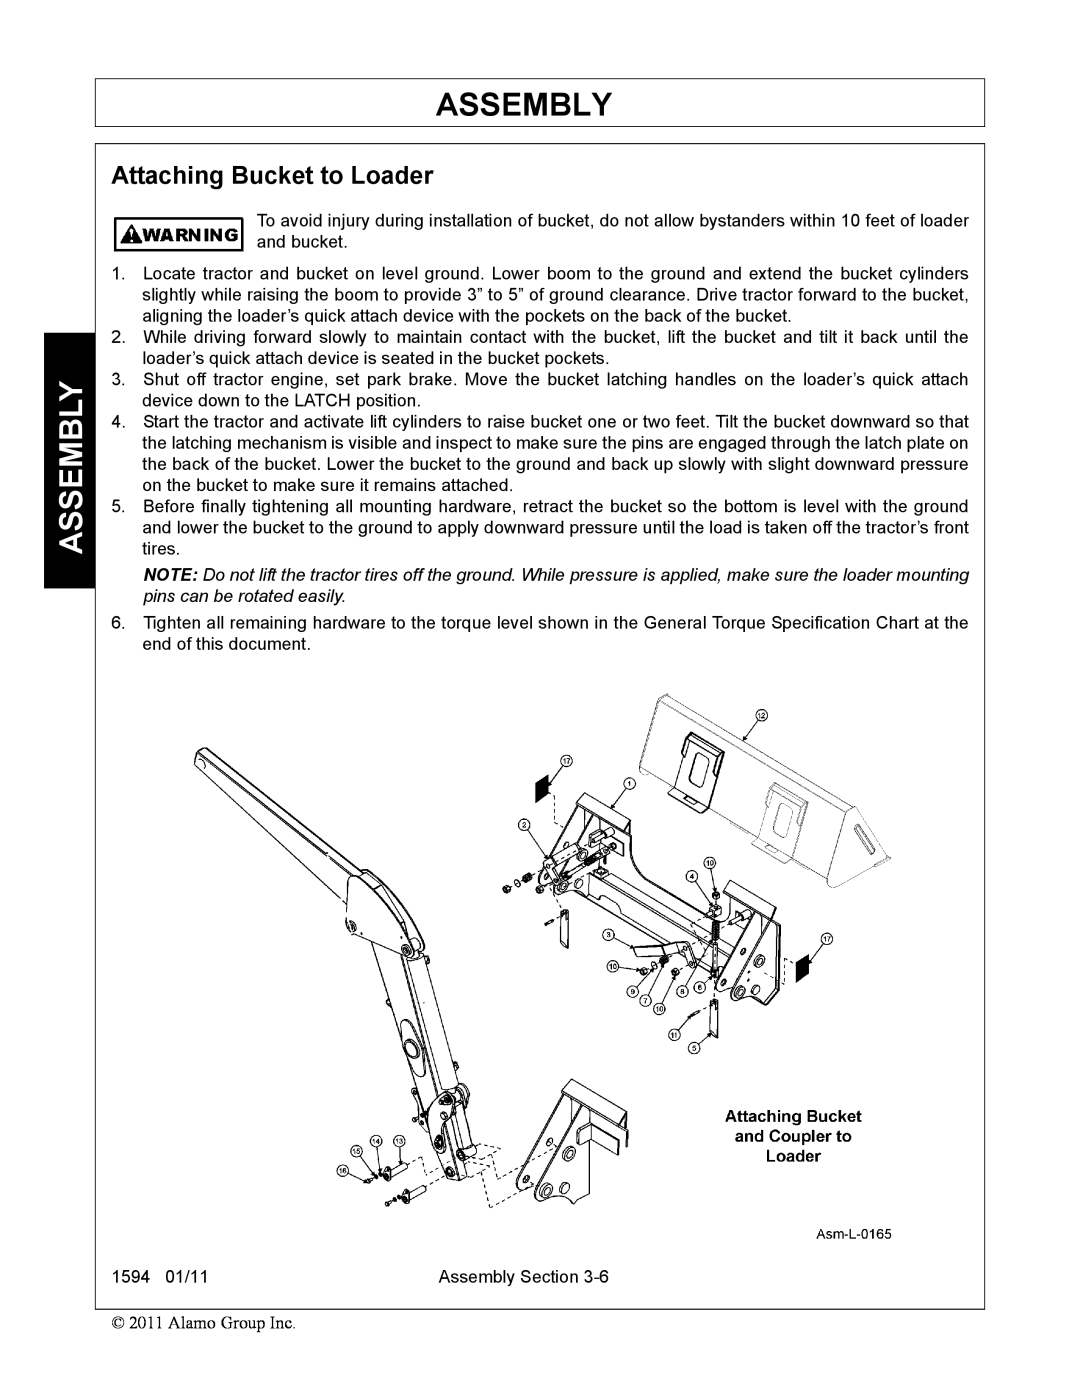 Rhino Mounts 1594 manual Assembly, Attaching Bucket to Loader 